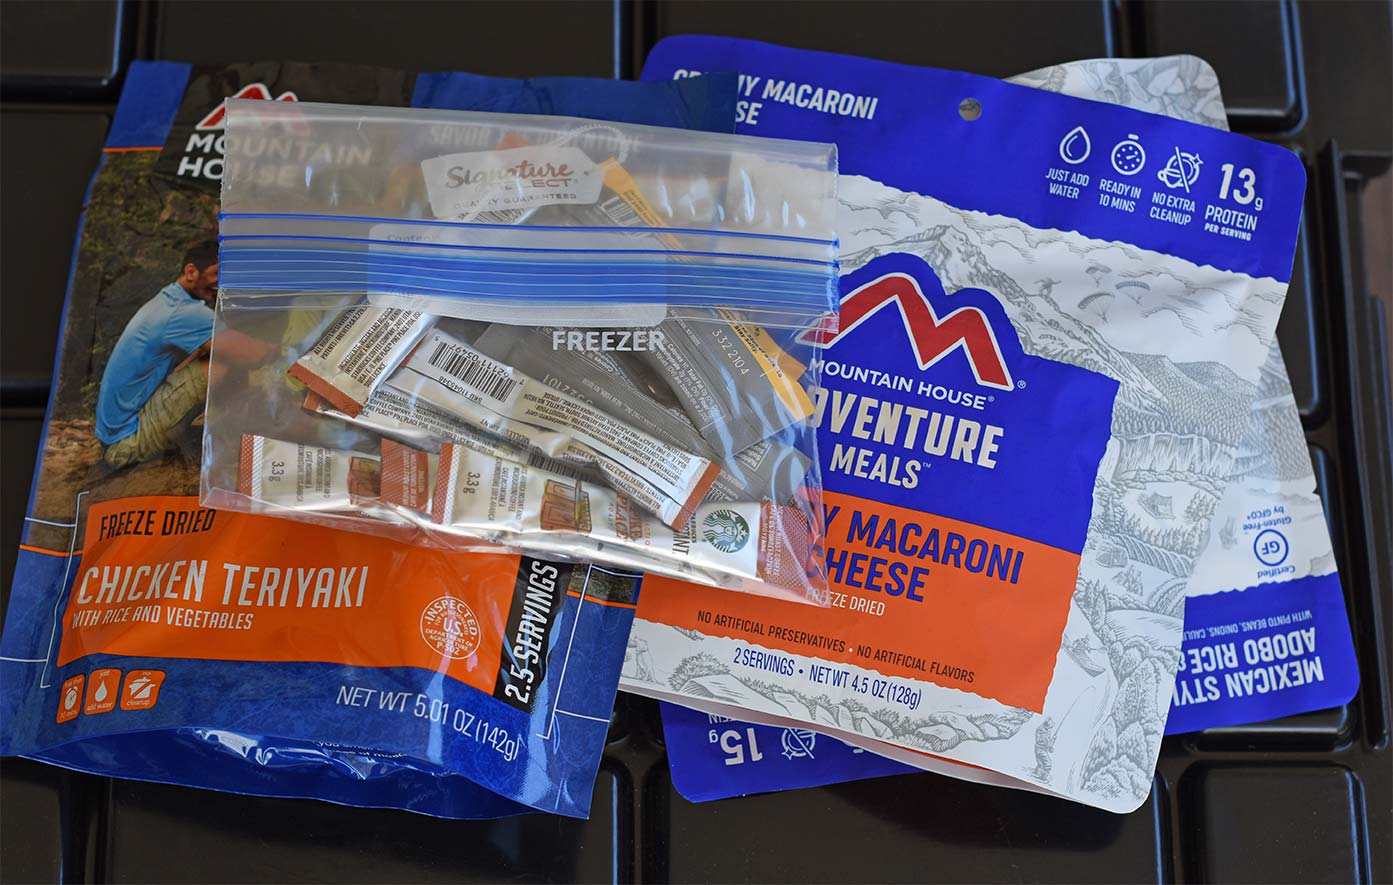 Packages of mountain house dehydrated food, instant coffee, and packets of electrolytes